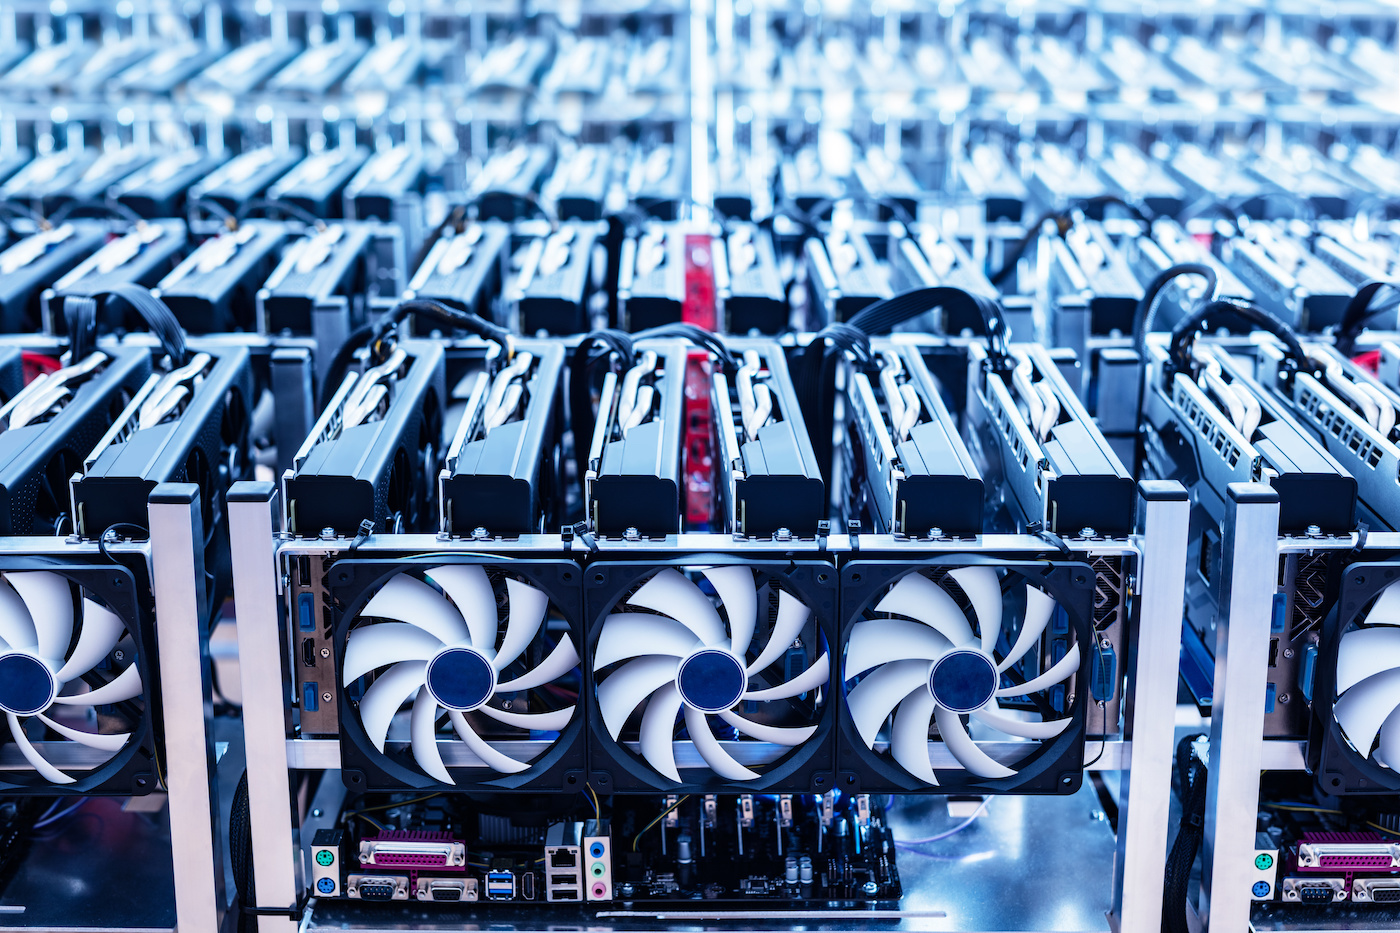 Simple hardware and software needed to start mining cryptocurrency